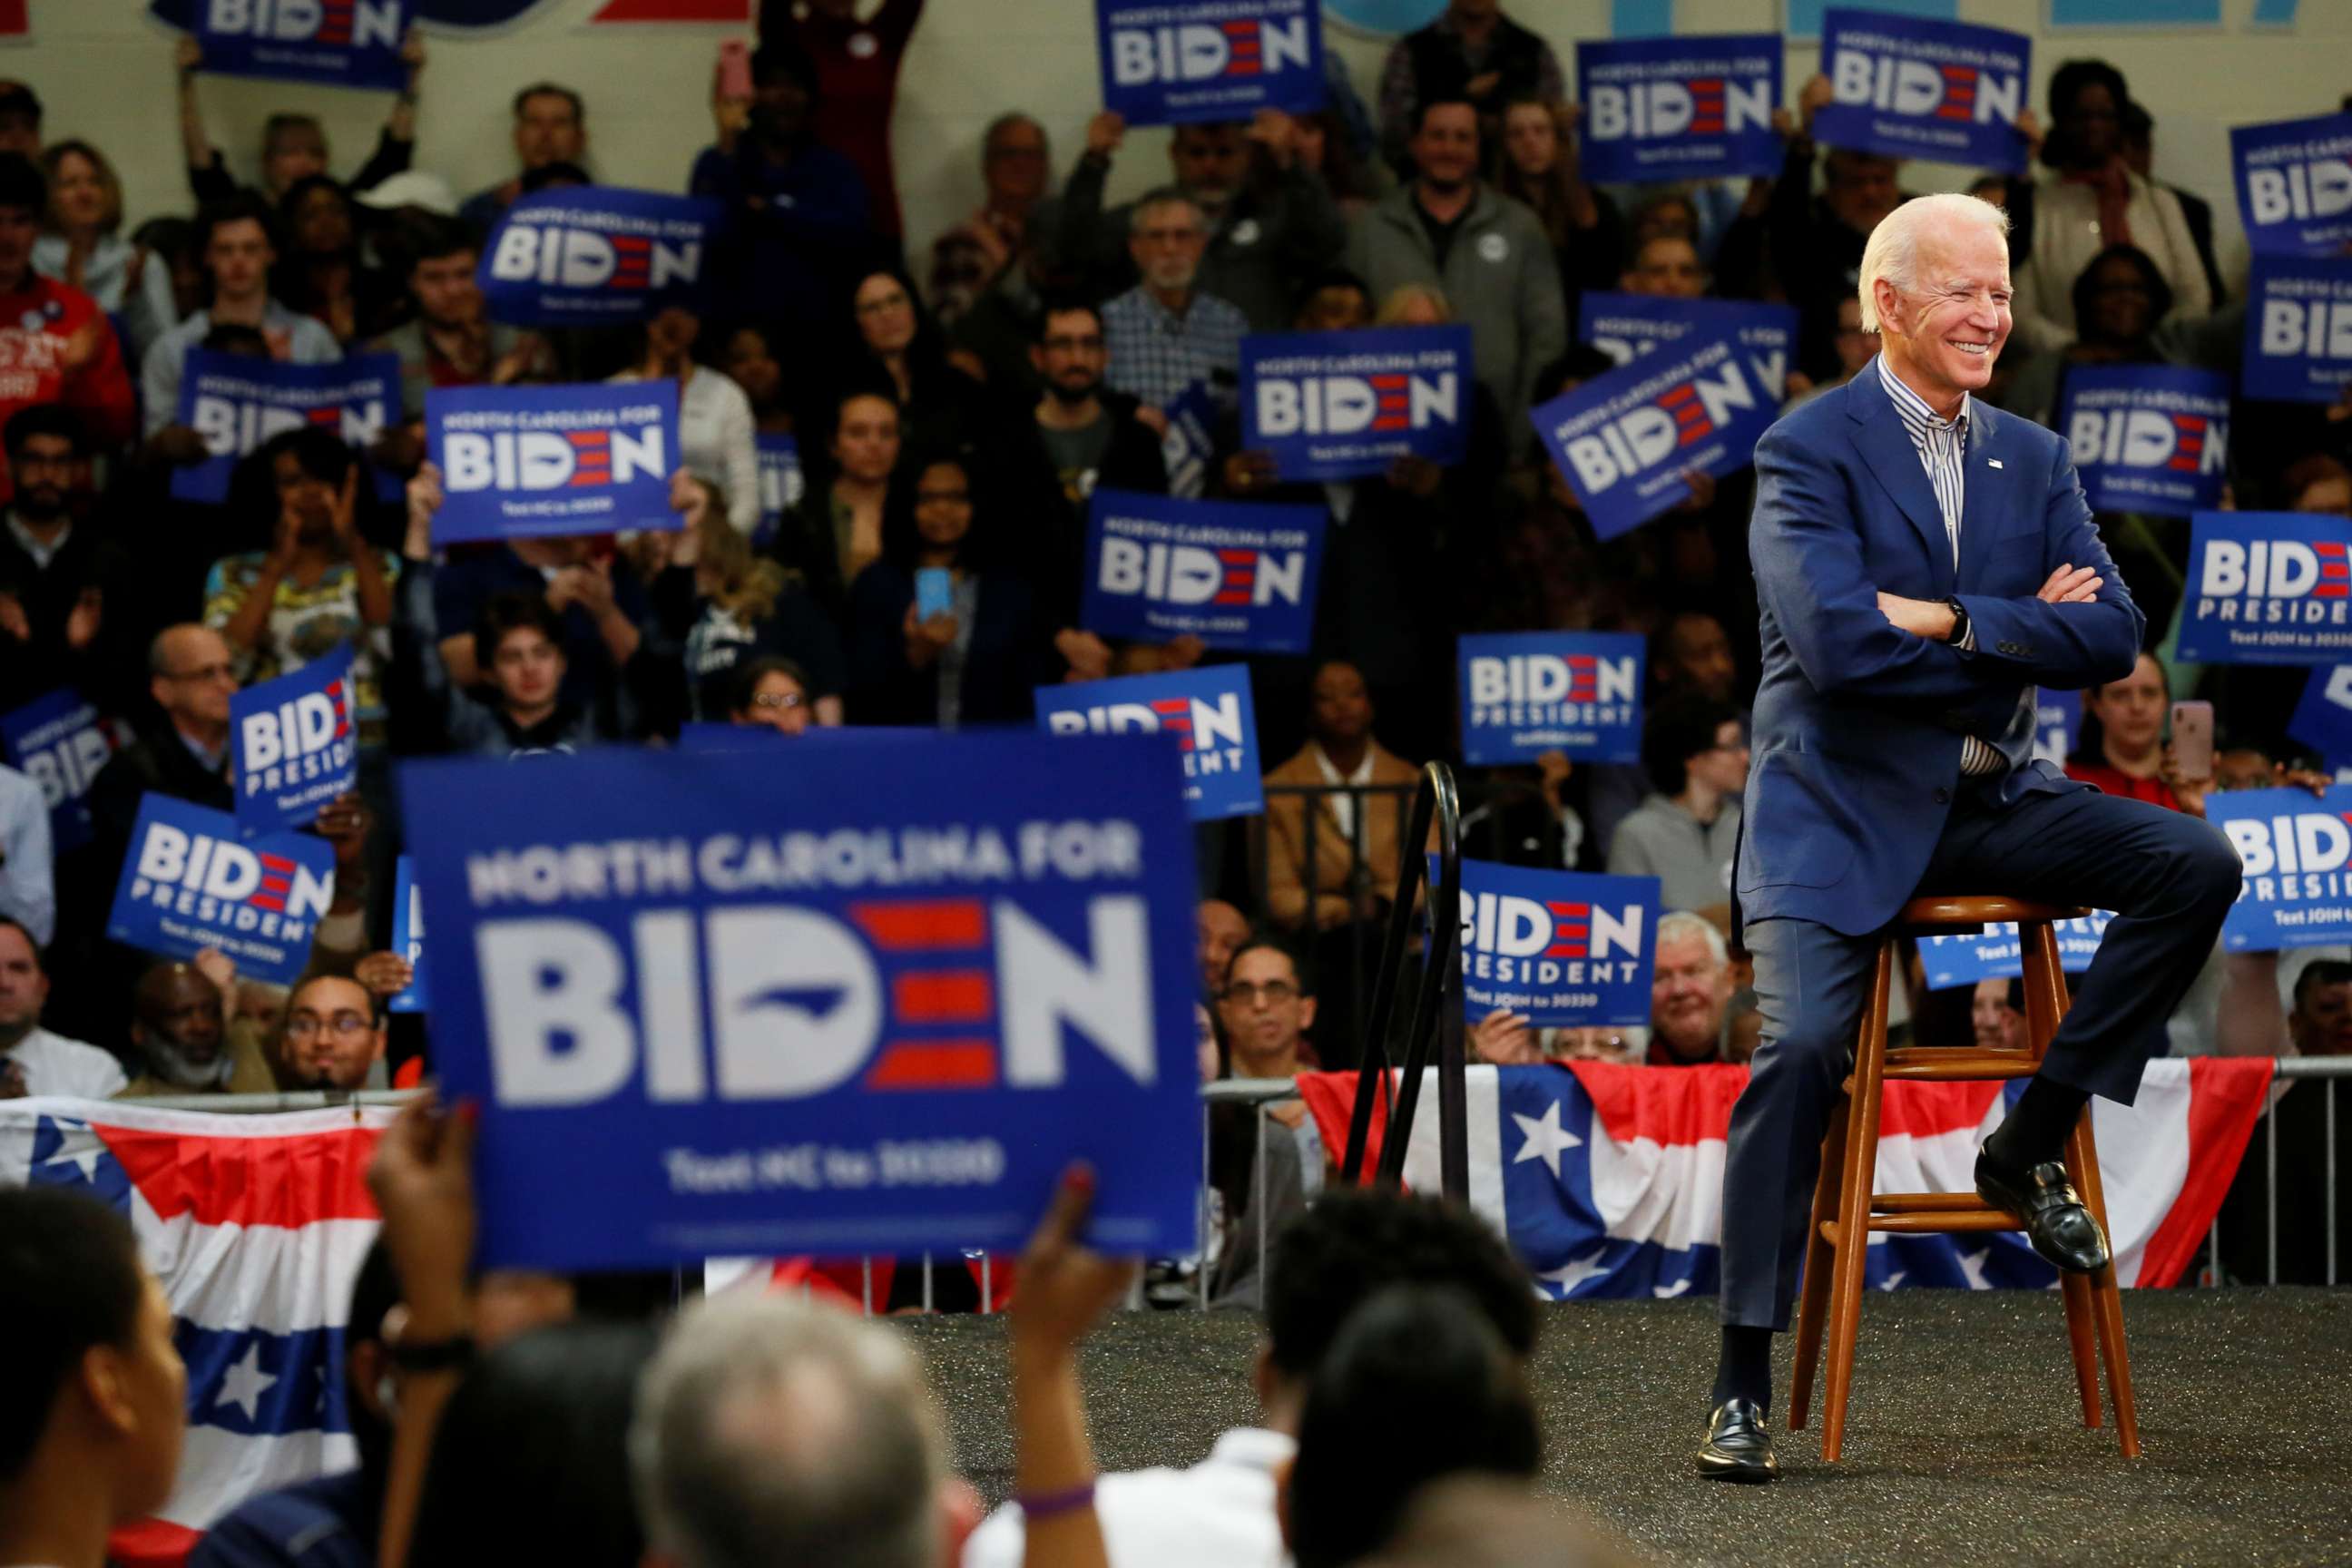 PHOTO: Democratic presidential candidate Joe Biden listens to the introductory speakers during a campaign event at Saint Augustine's University in Raleigh, N.C., Feb. 29, 2020.